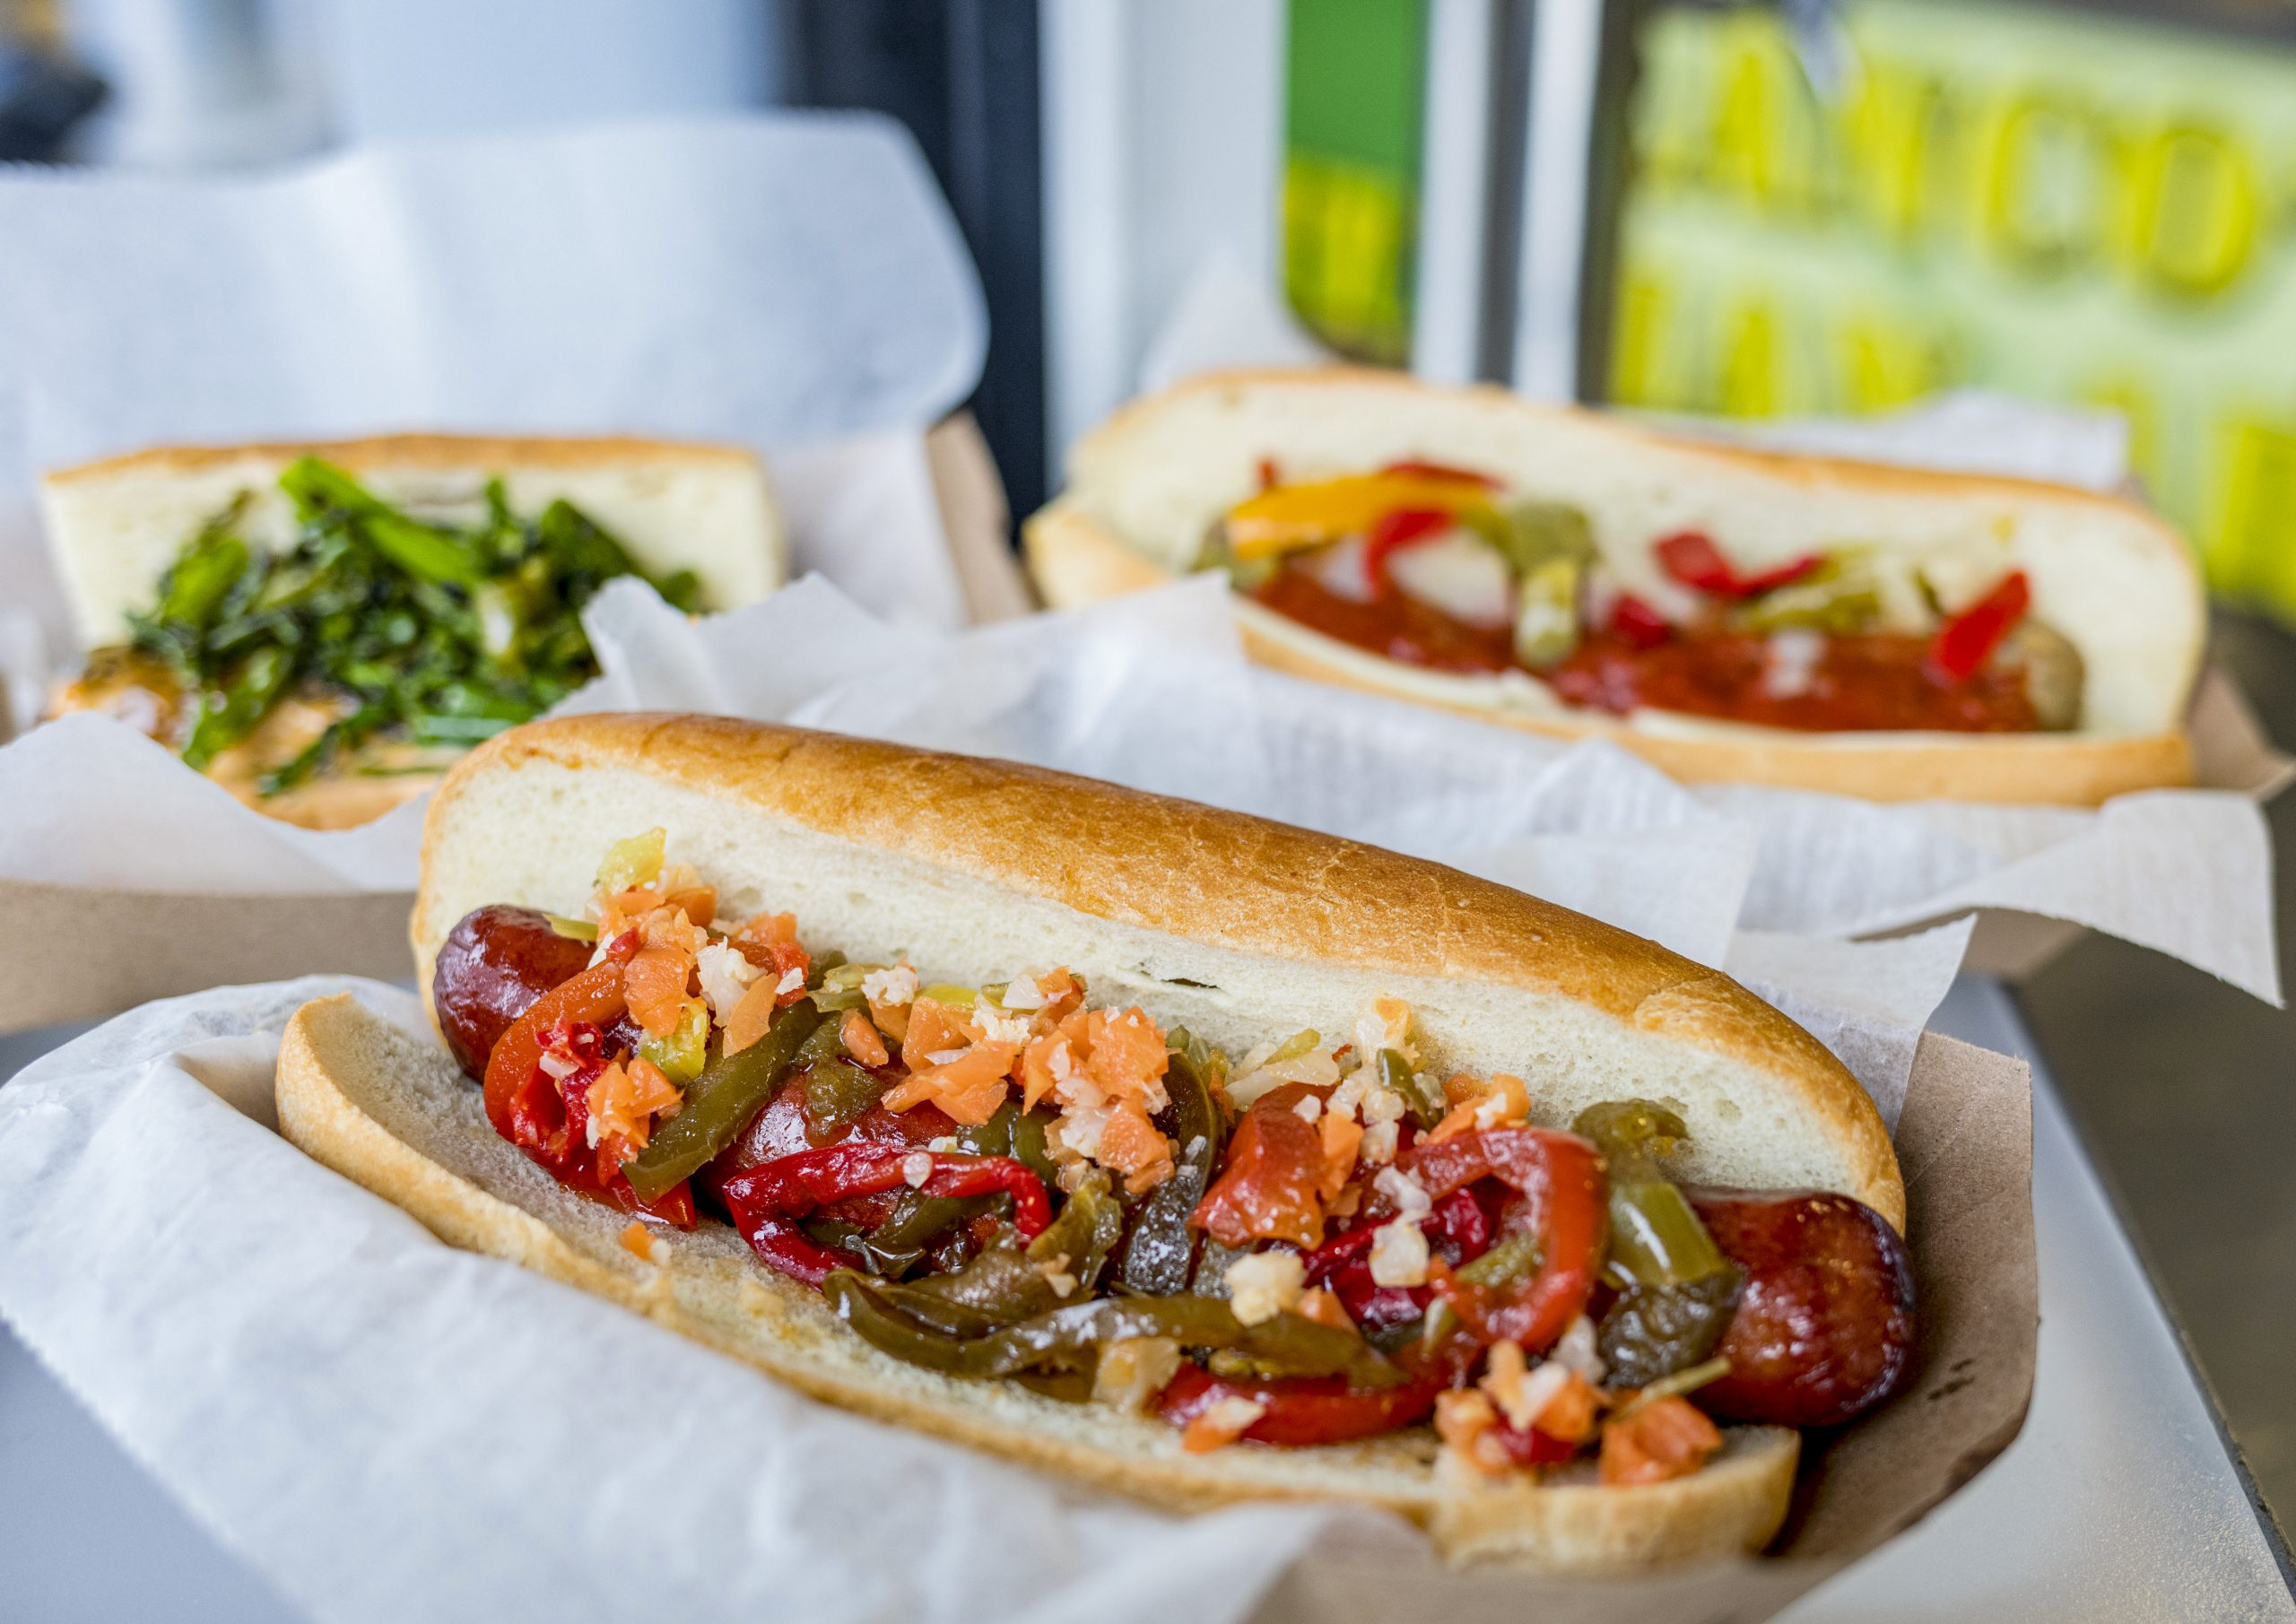 Papa's Hot Doggeria To Go Day 124: Spicy Sausage 